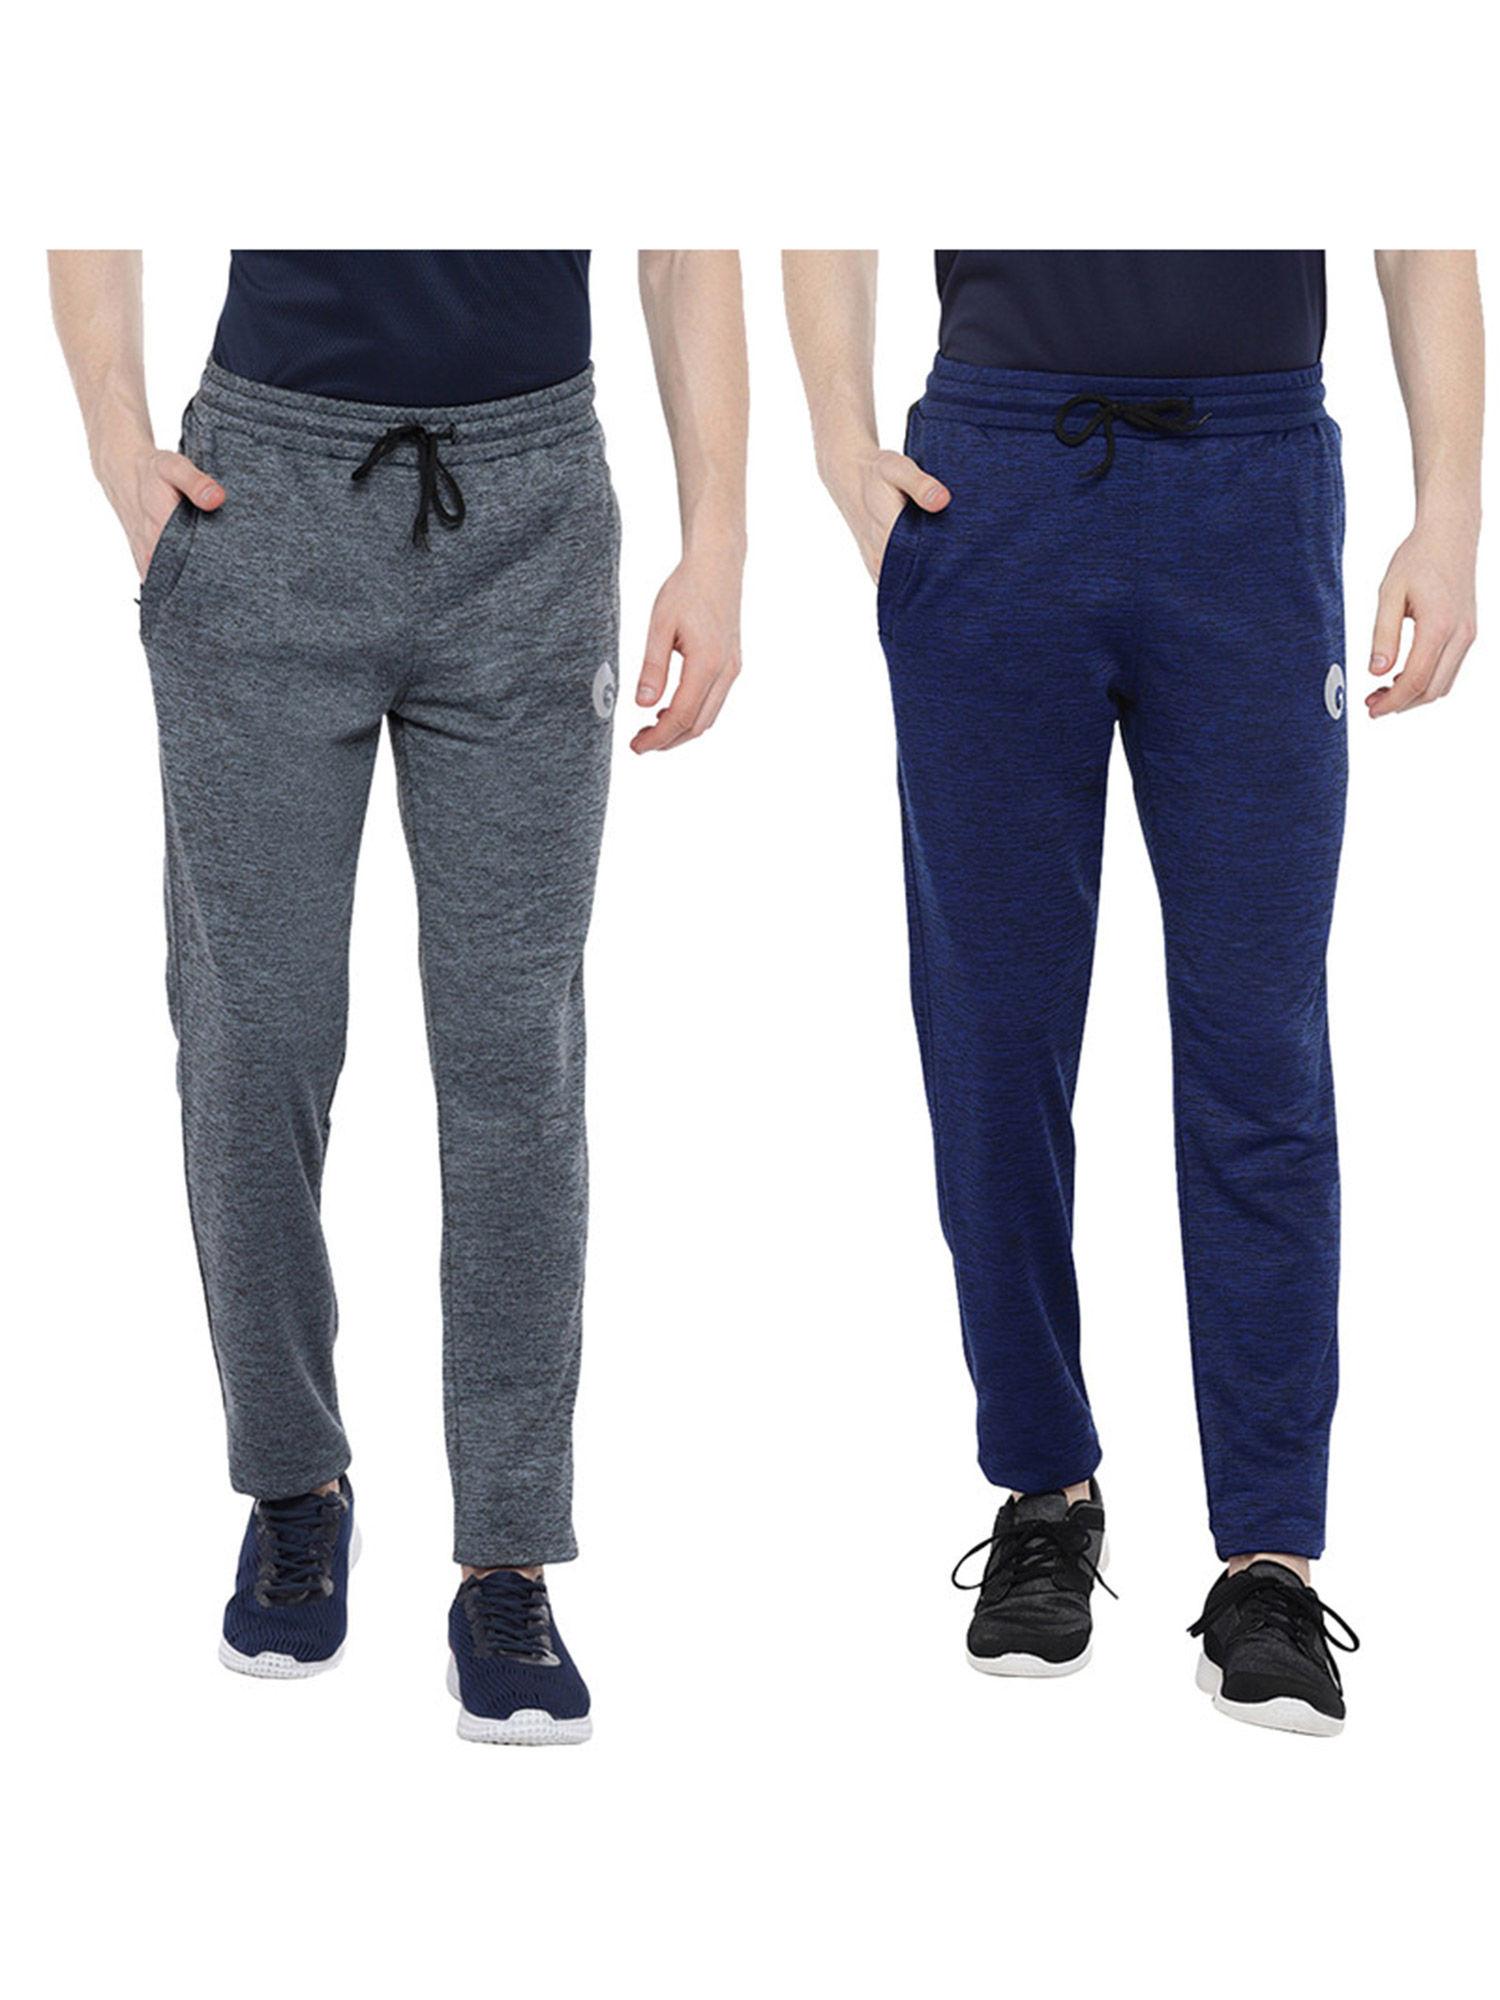 sport,gym & workout track pant 12 for mens blue-grey (pack of 2)